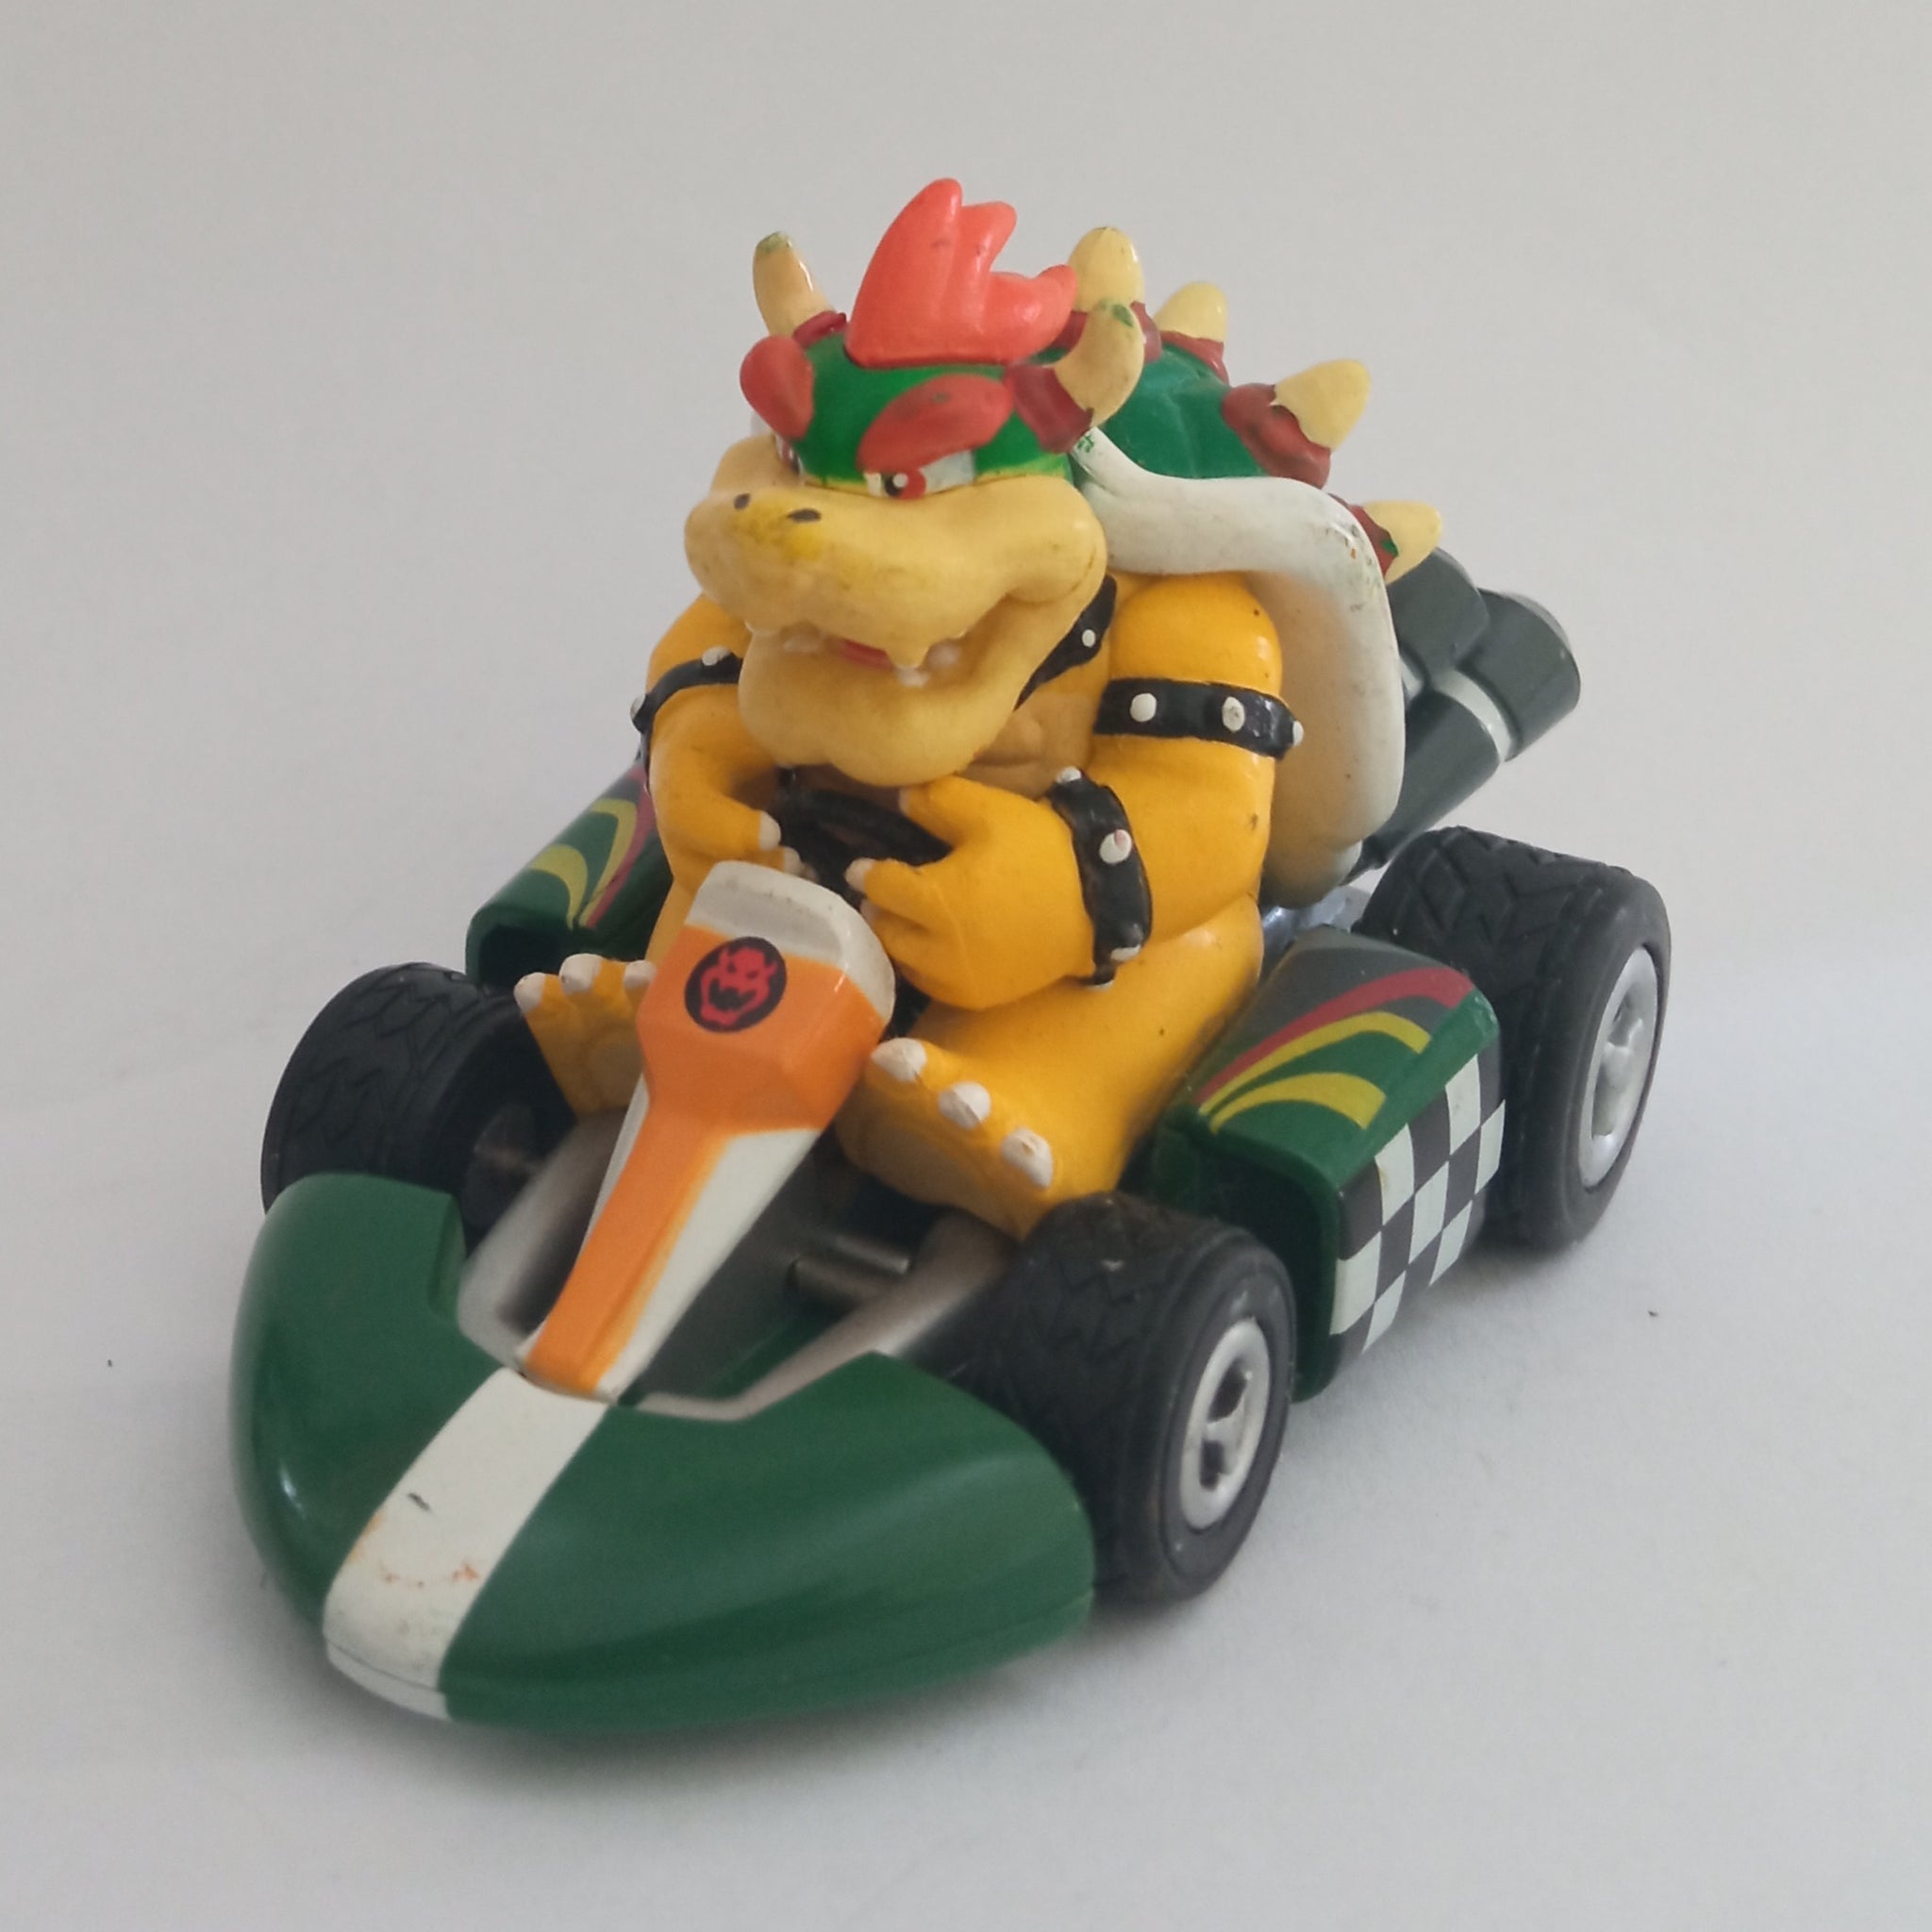 Mario Kart Pull Back Speed Racers Bowser Hot Rod Race Car from Japan